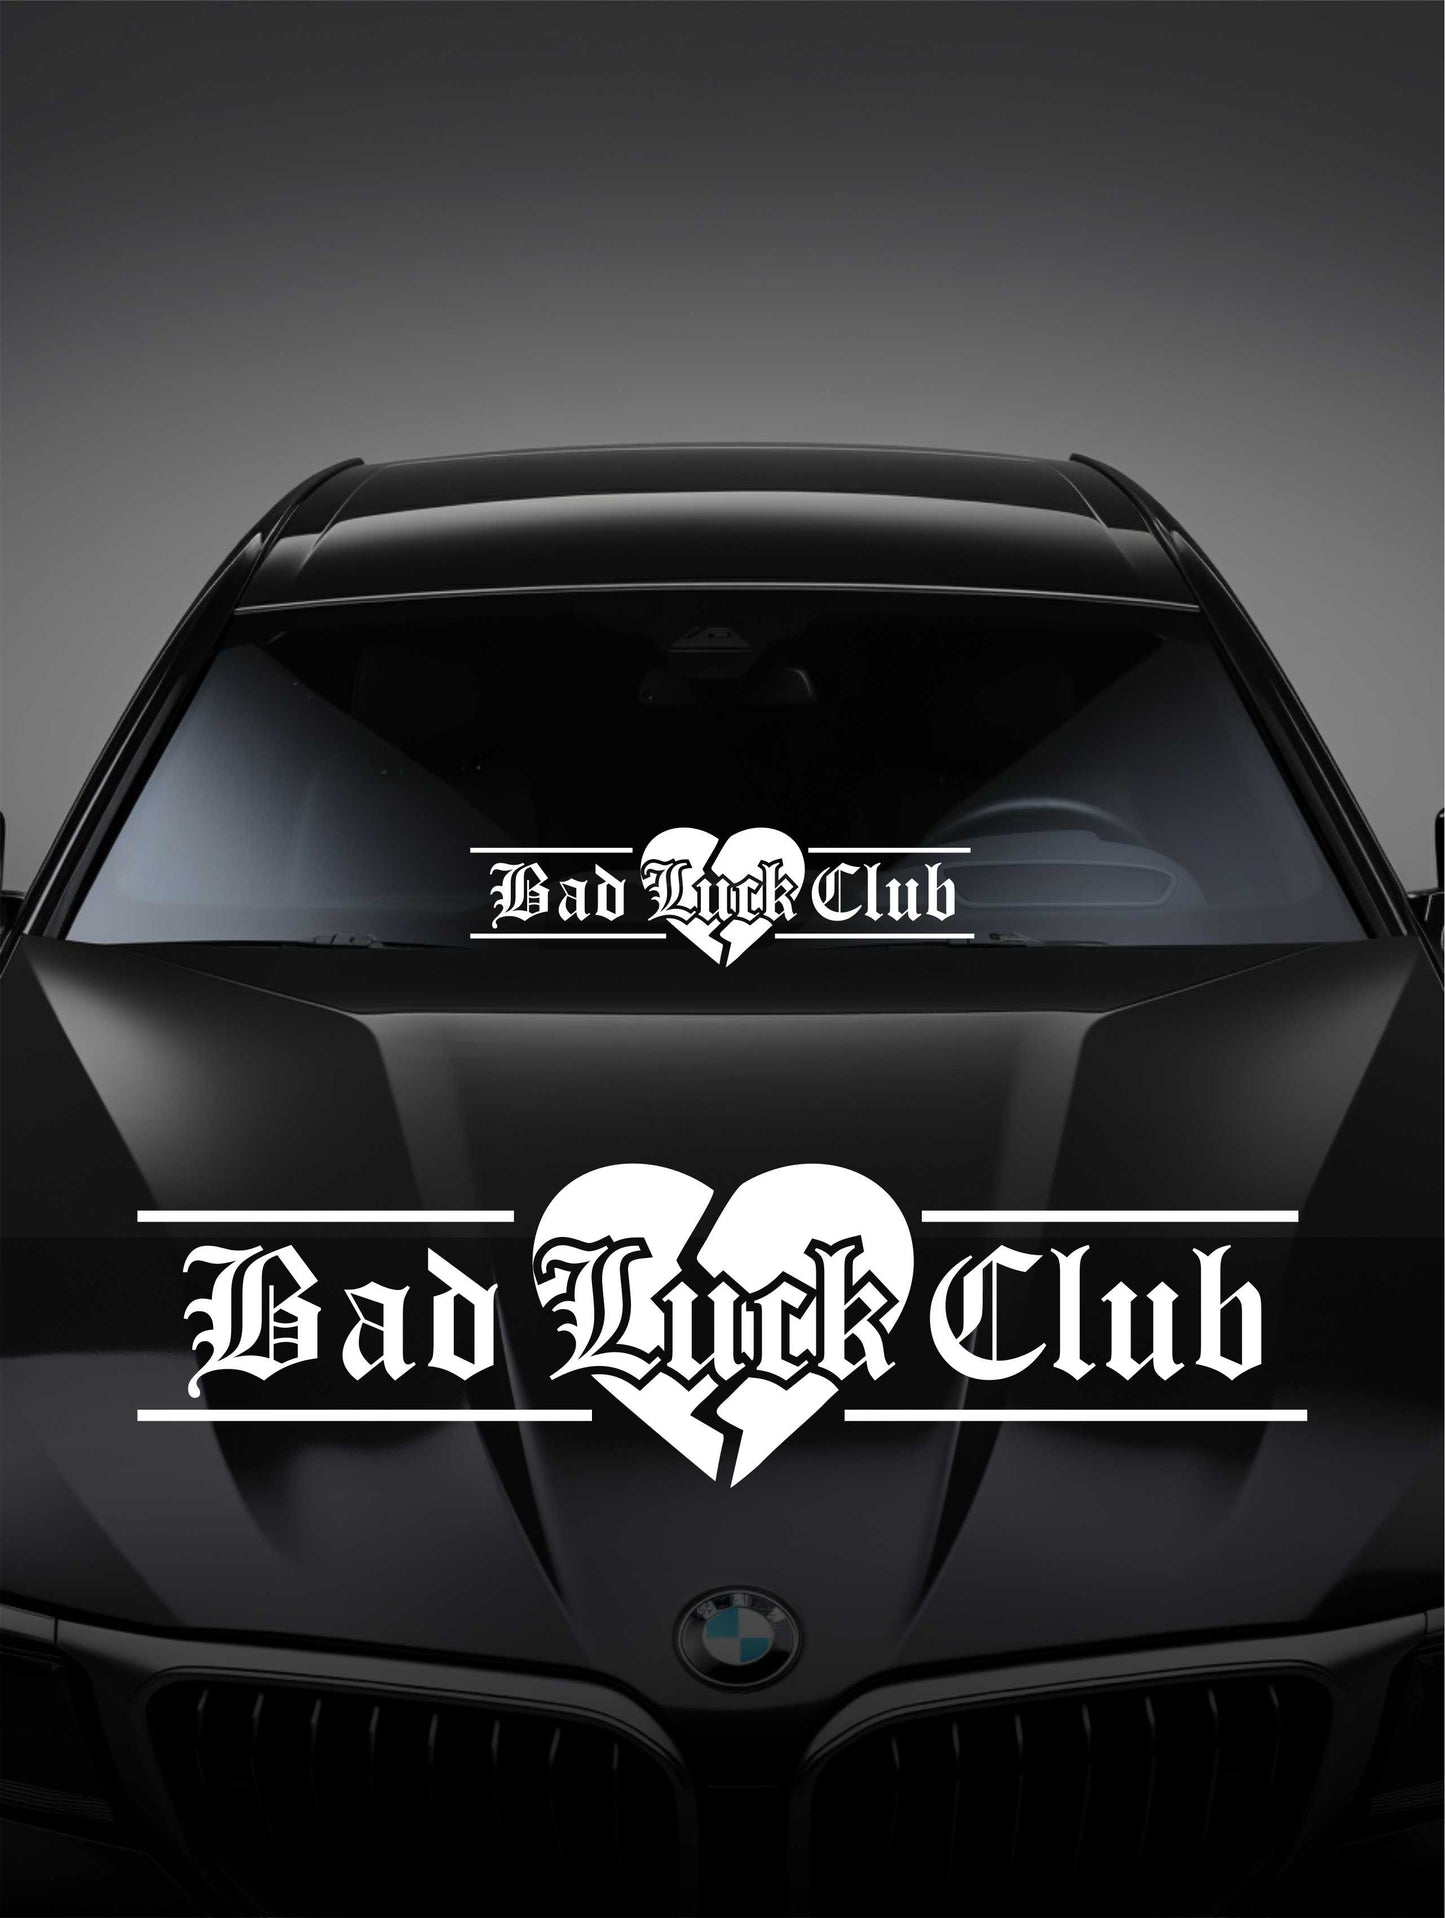 ''Bad Luck Club'' - Plotted Vinyl Banner Decal